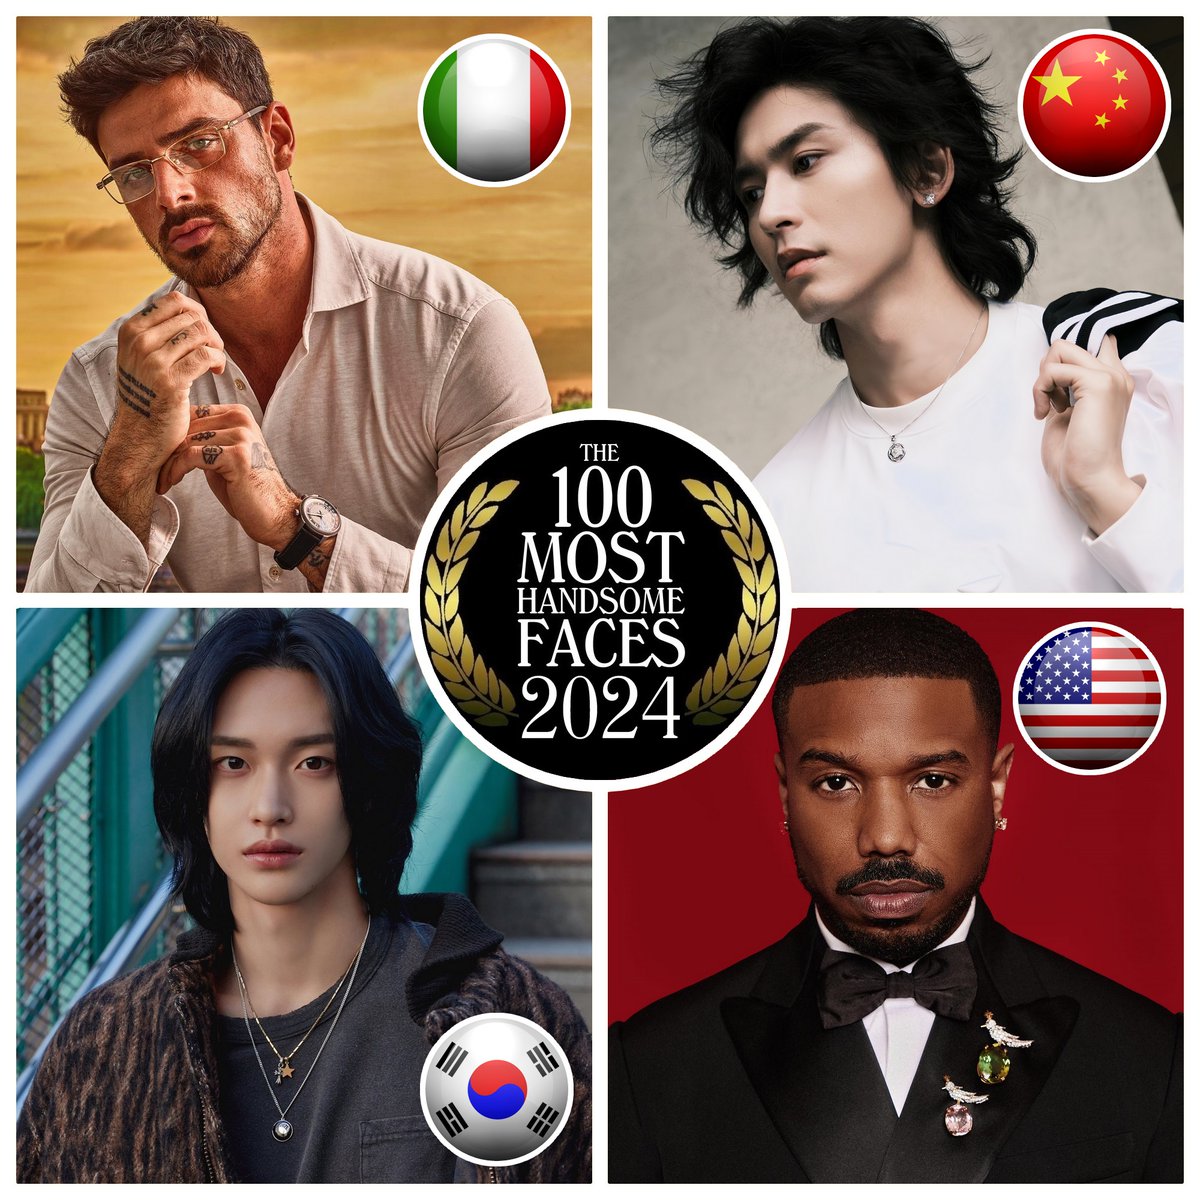 Which Face Should Be Nominated? These are the faces nominated today. Nominate & Vote for the Top 100 of 2024 here - patreon.com/tccandler #tccandler #100faces2024 #EmmaWatson #cansutuman #bessanismail #YEJI #ITZY #michelemorrone #zhangzhehan #WONBIN #RIIZE #michaelbjordan